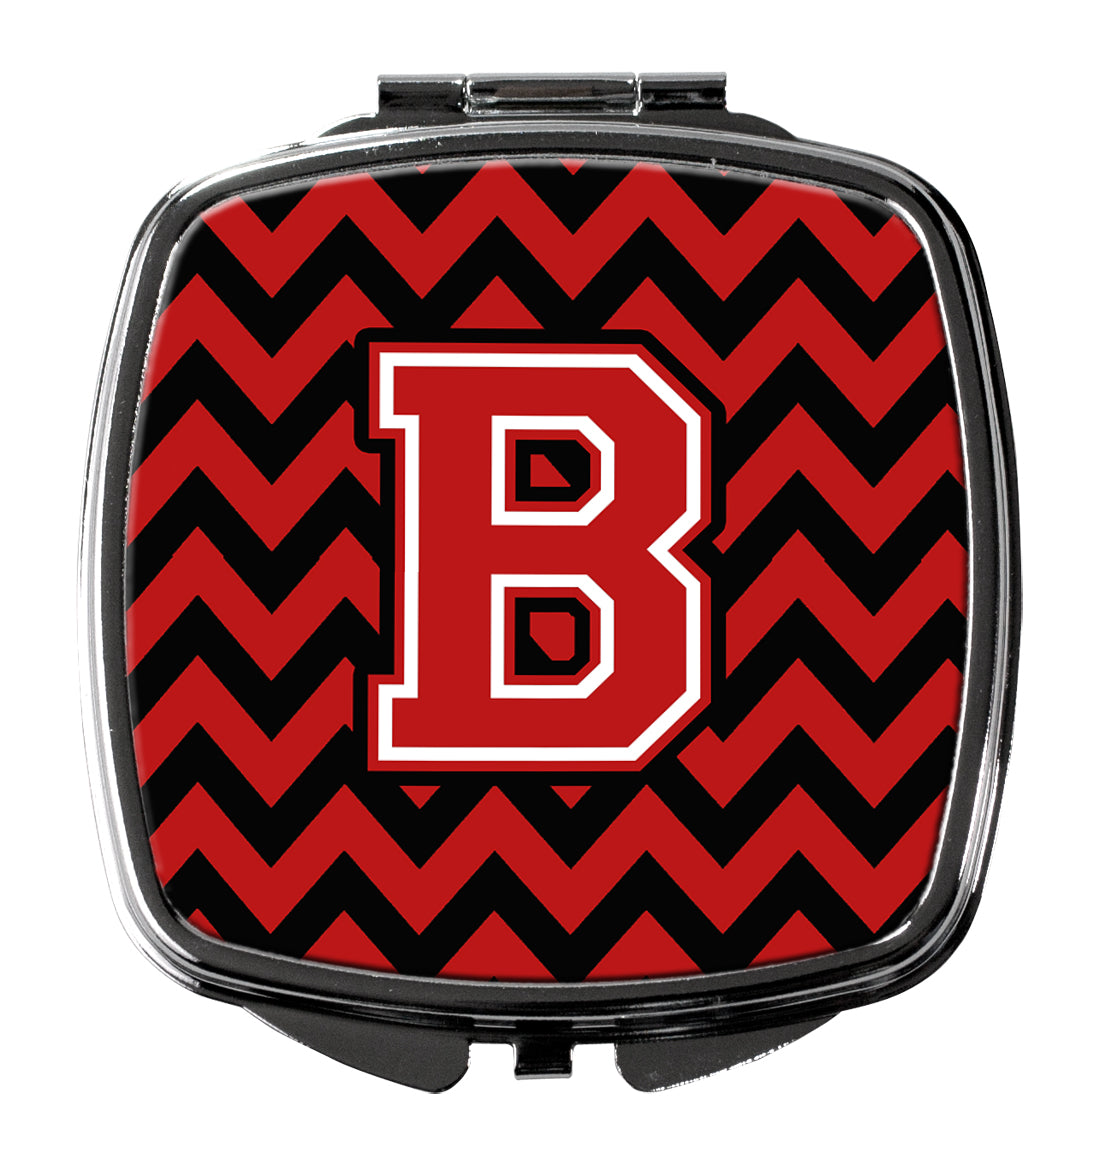 Letter B Chevron Black and Red   Compact Mirror CJ1047-BSCM